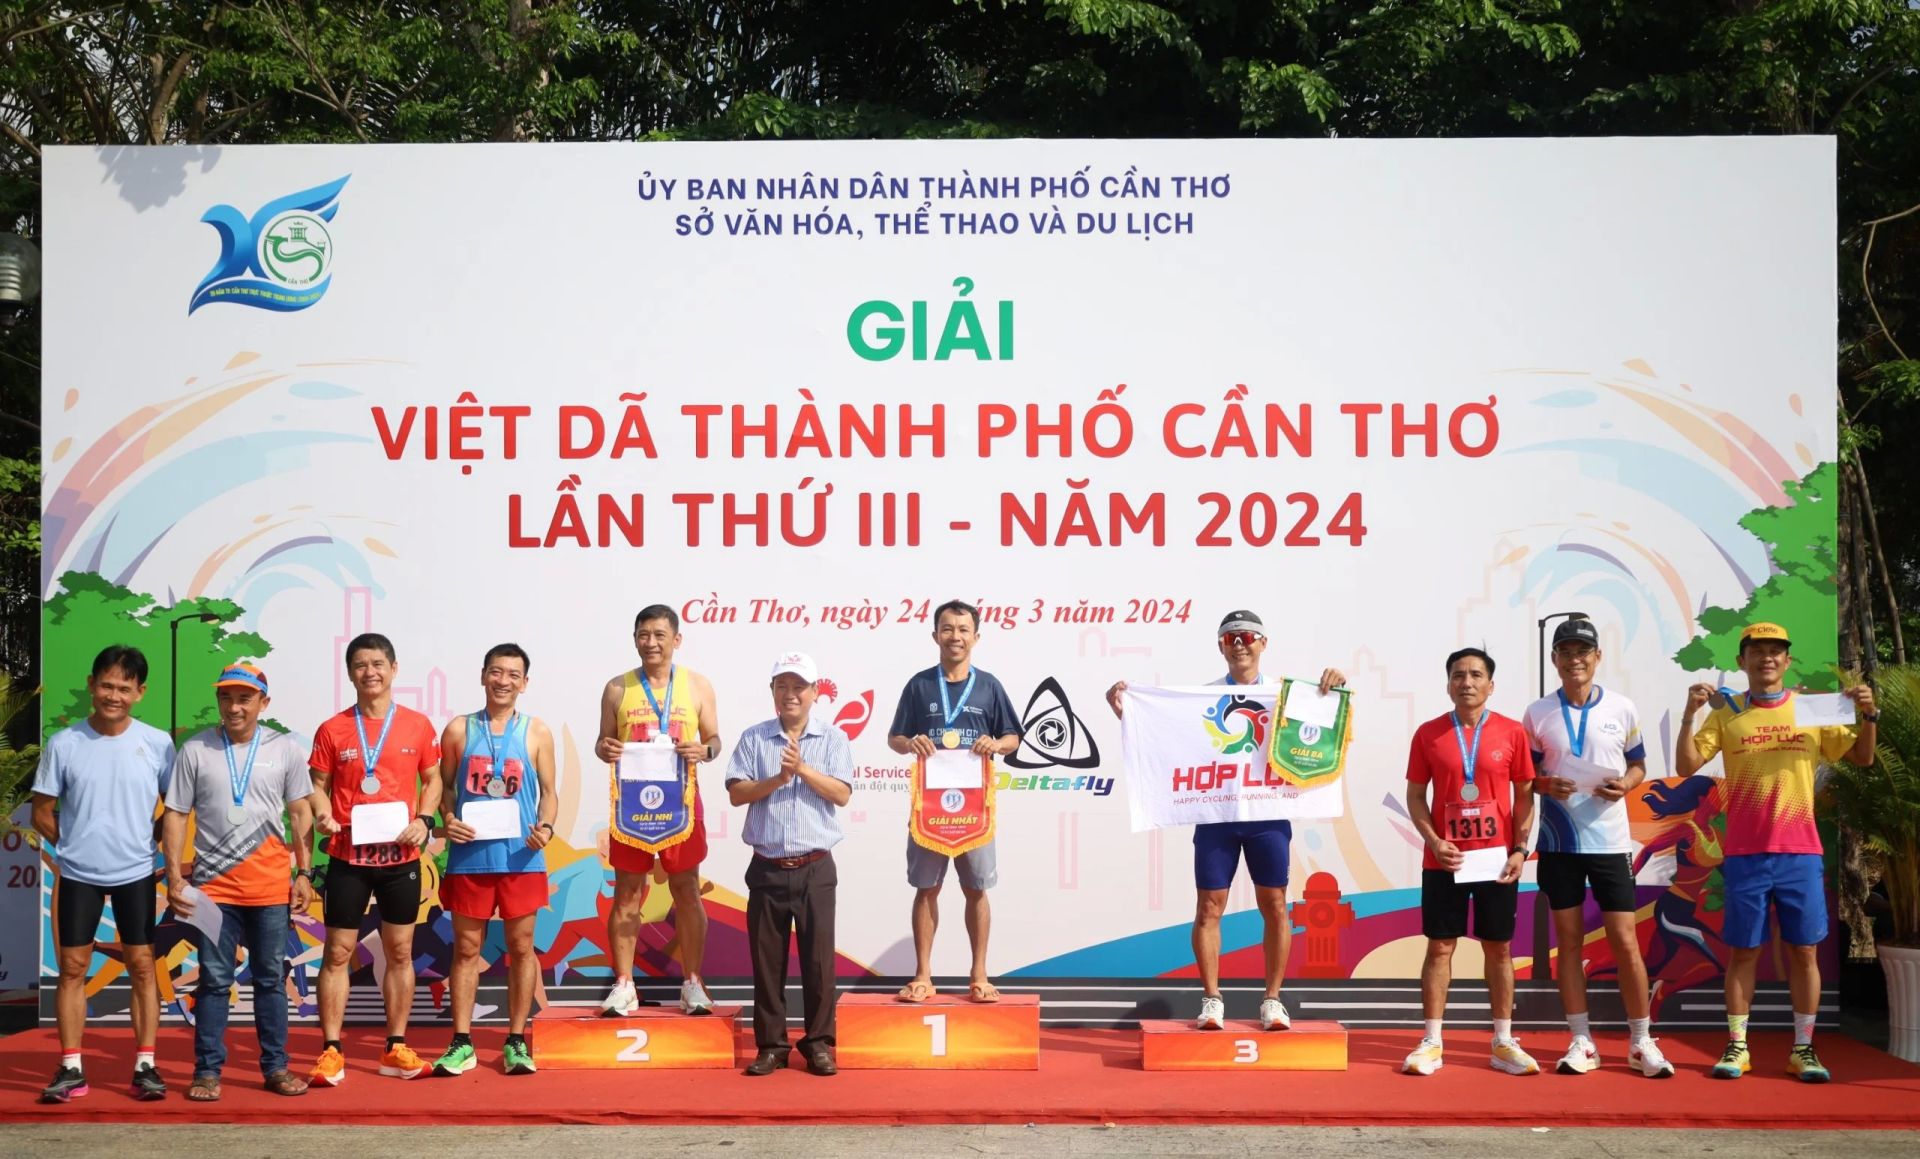 Mr Truong Cong Quoc Viet - Deputy Director of the Department of Culture, Sports and Tourism of Can Tho City and Mr Lu Quoc Nhieu - Principal of Can Tho City High School for Gifted Students awarded the men’s 10km race for ages 51 and over